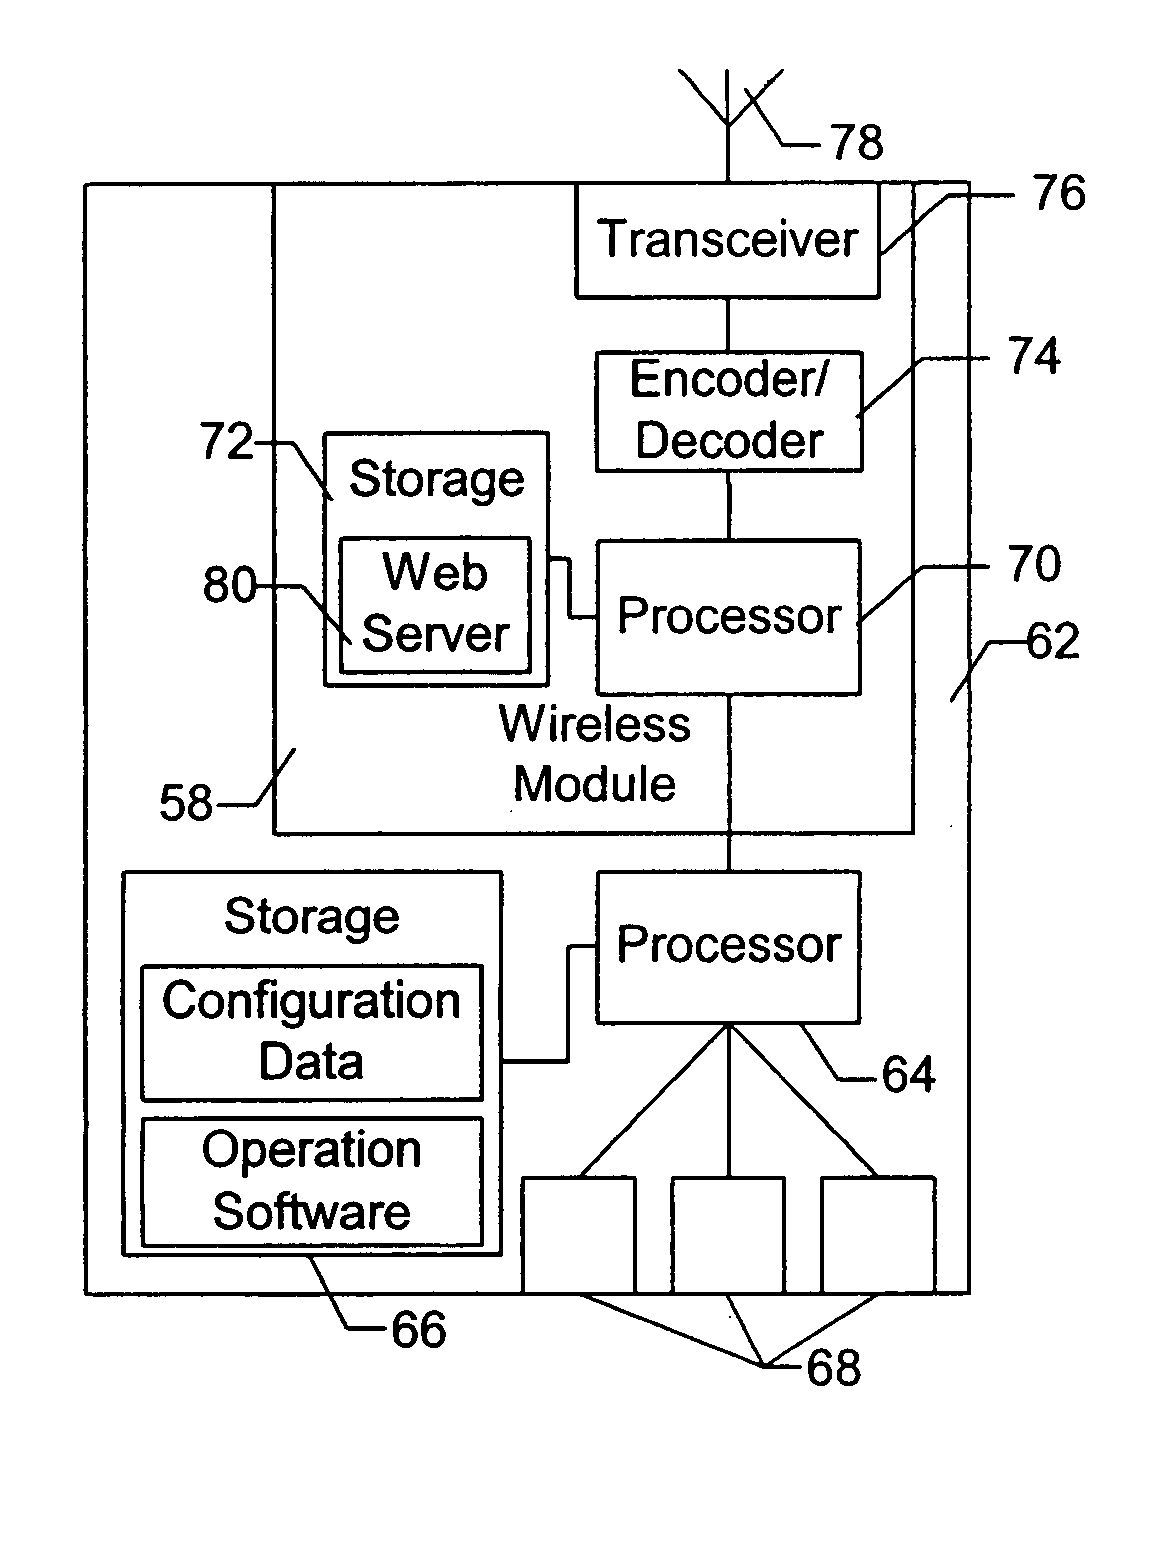 Systems and methods for facilitating wireless communication between various components of a distributed system